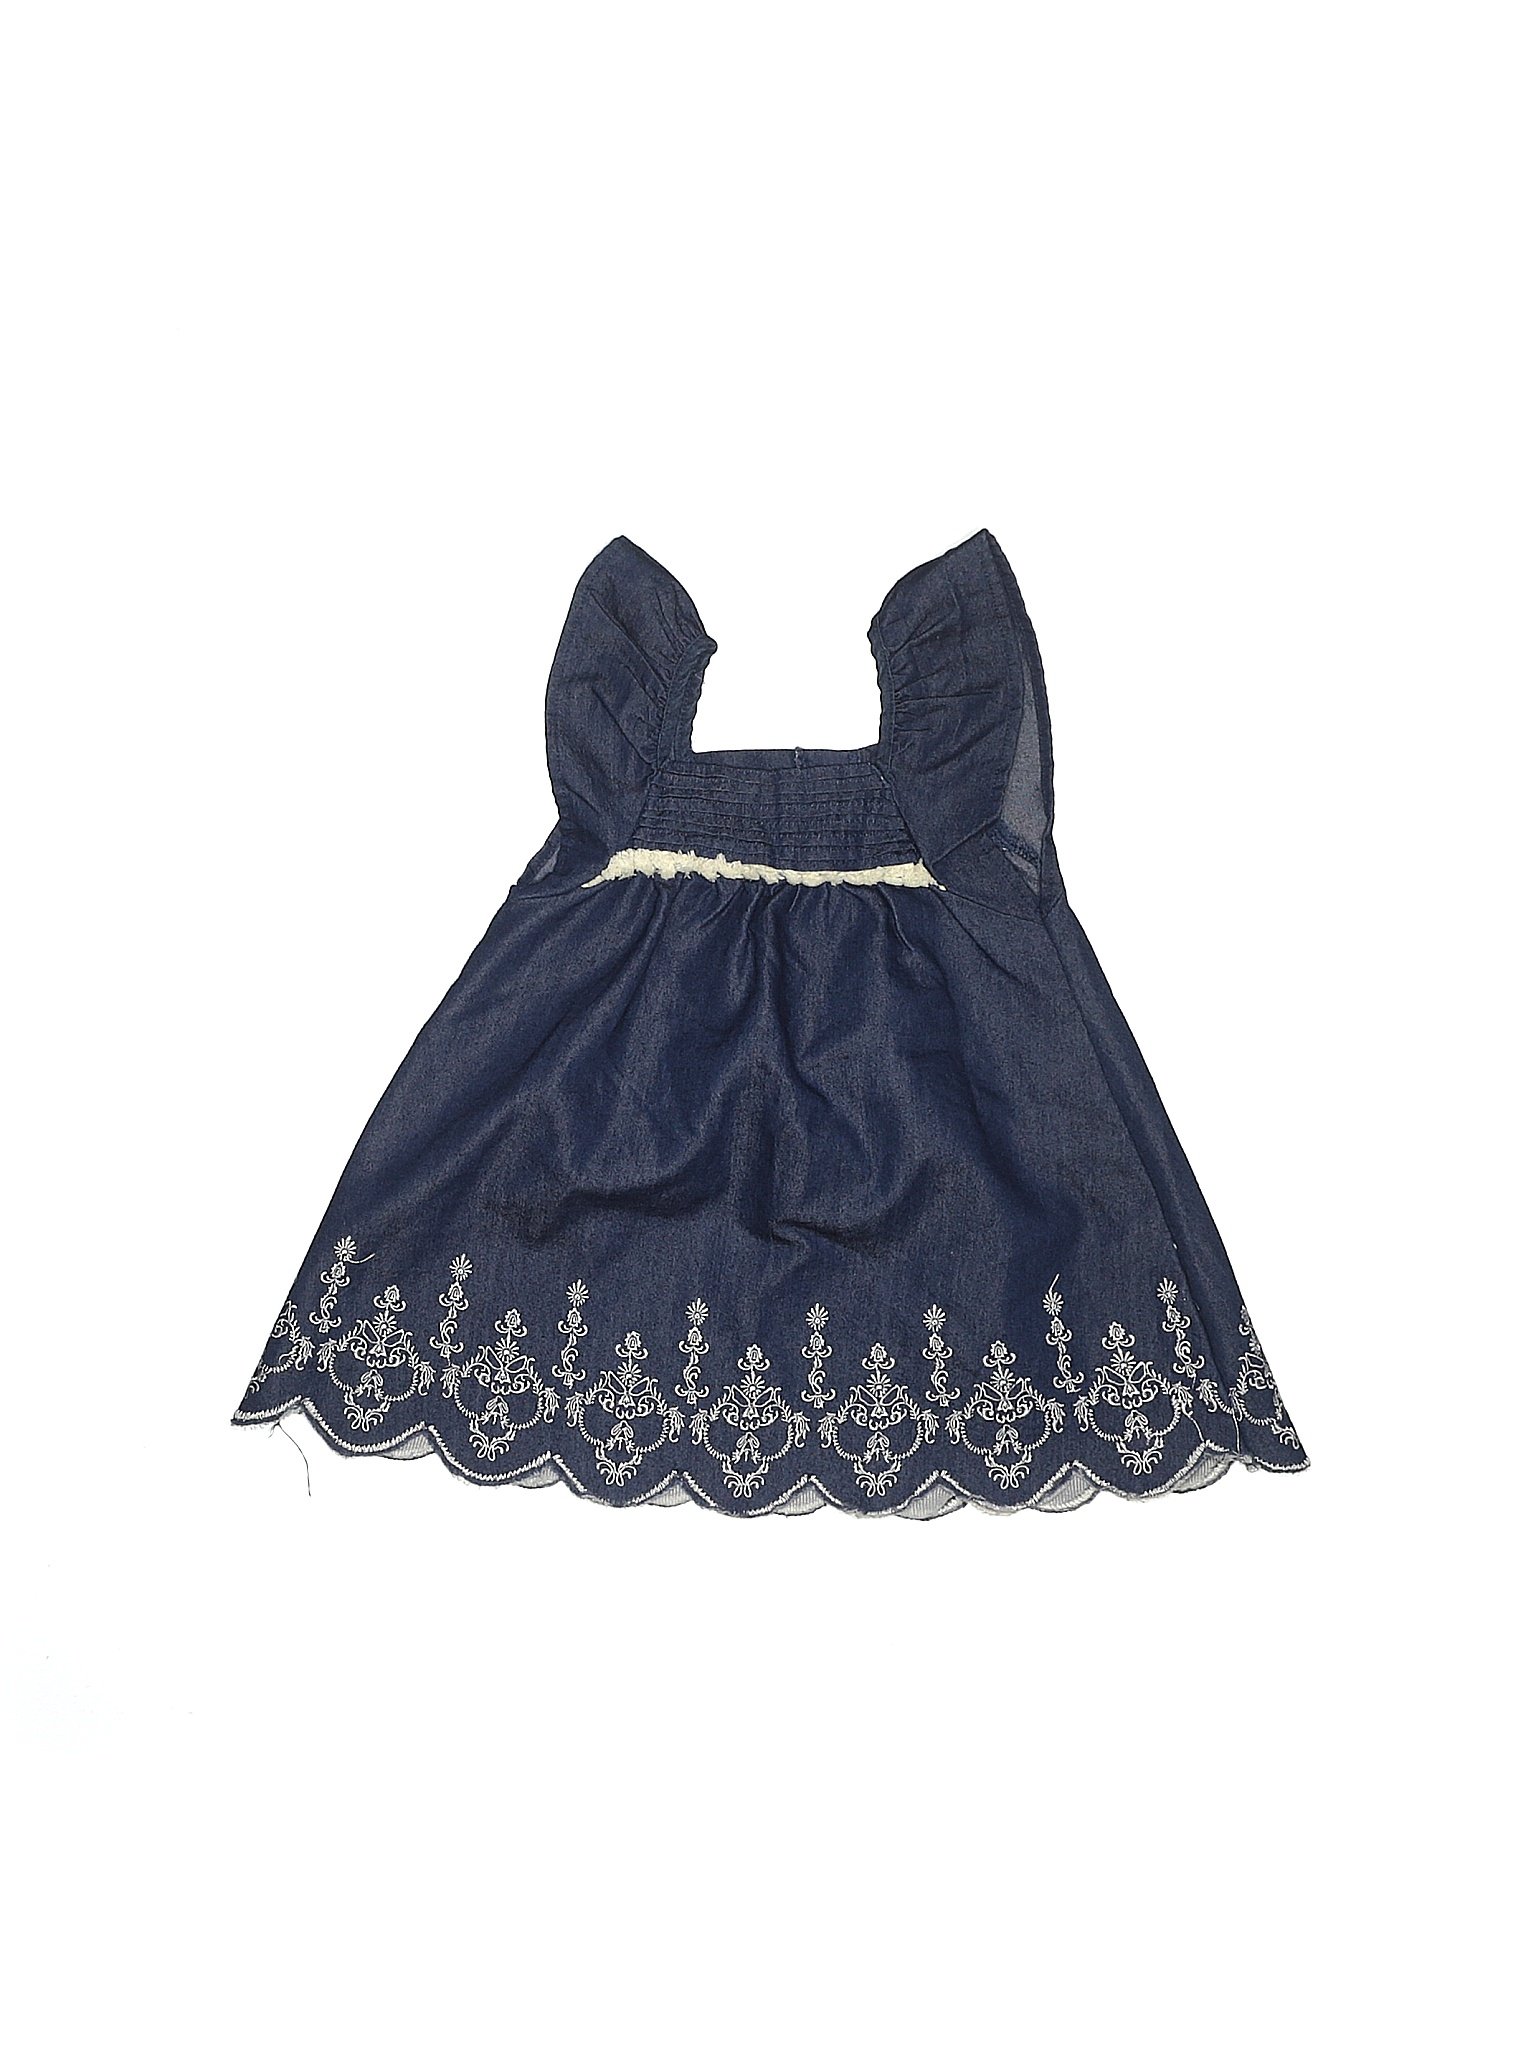 Jessica Simpson Girls' Clothing On Sale Up To 90% Off Retail | thredUP